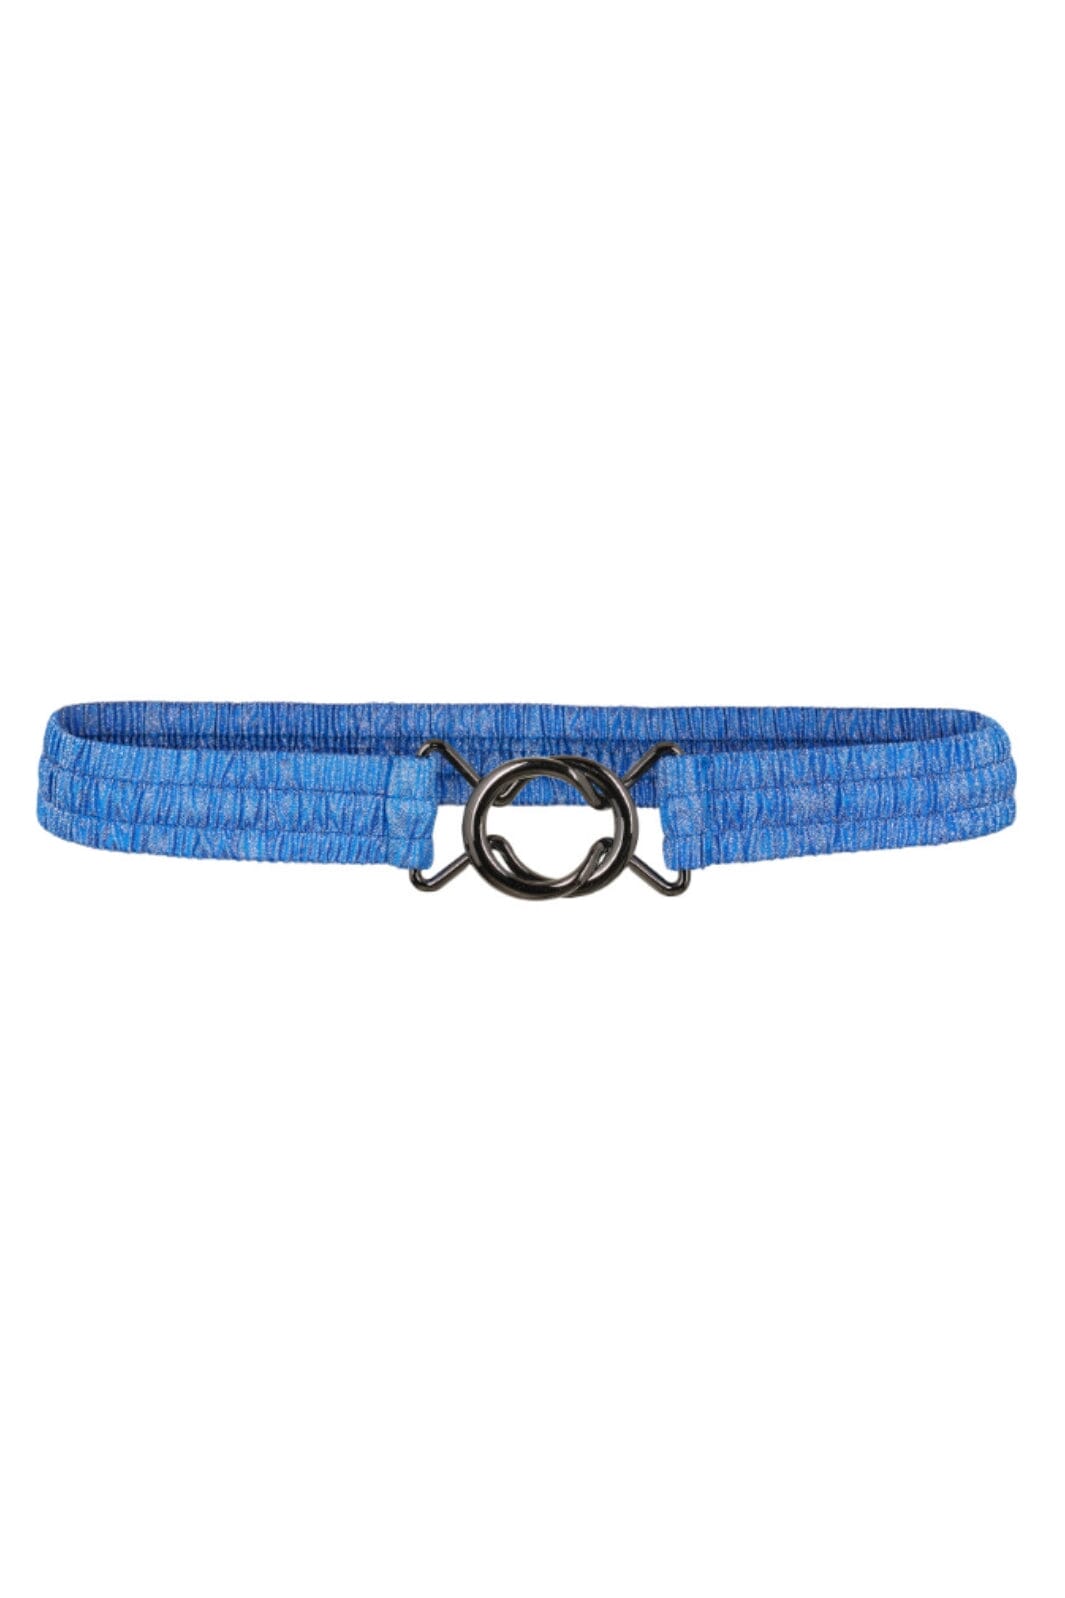 Co´couture - Shimmercc Belt - 76 New Blue 